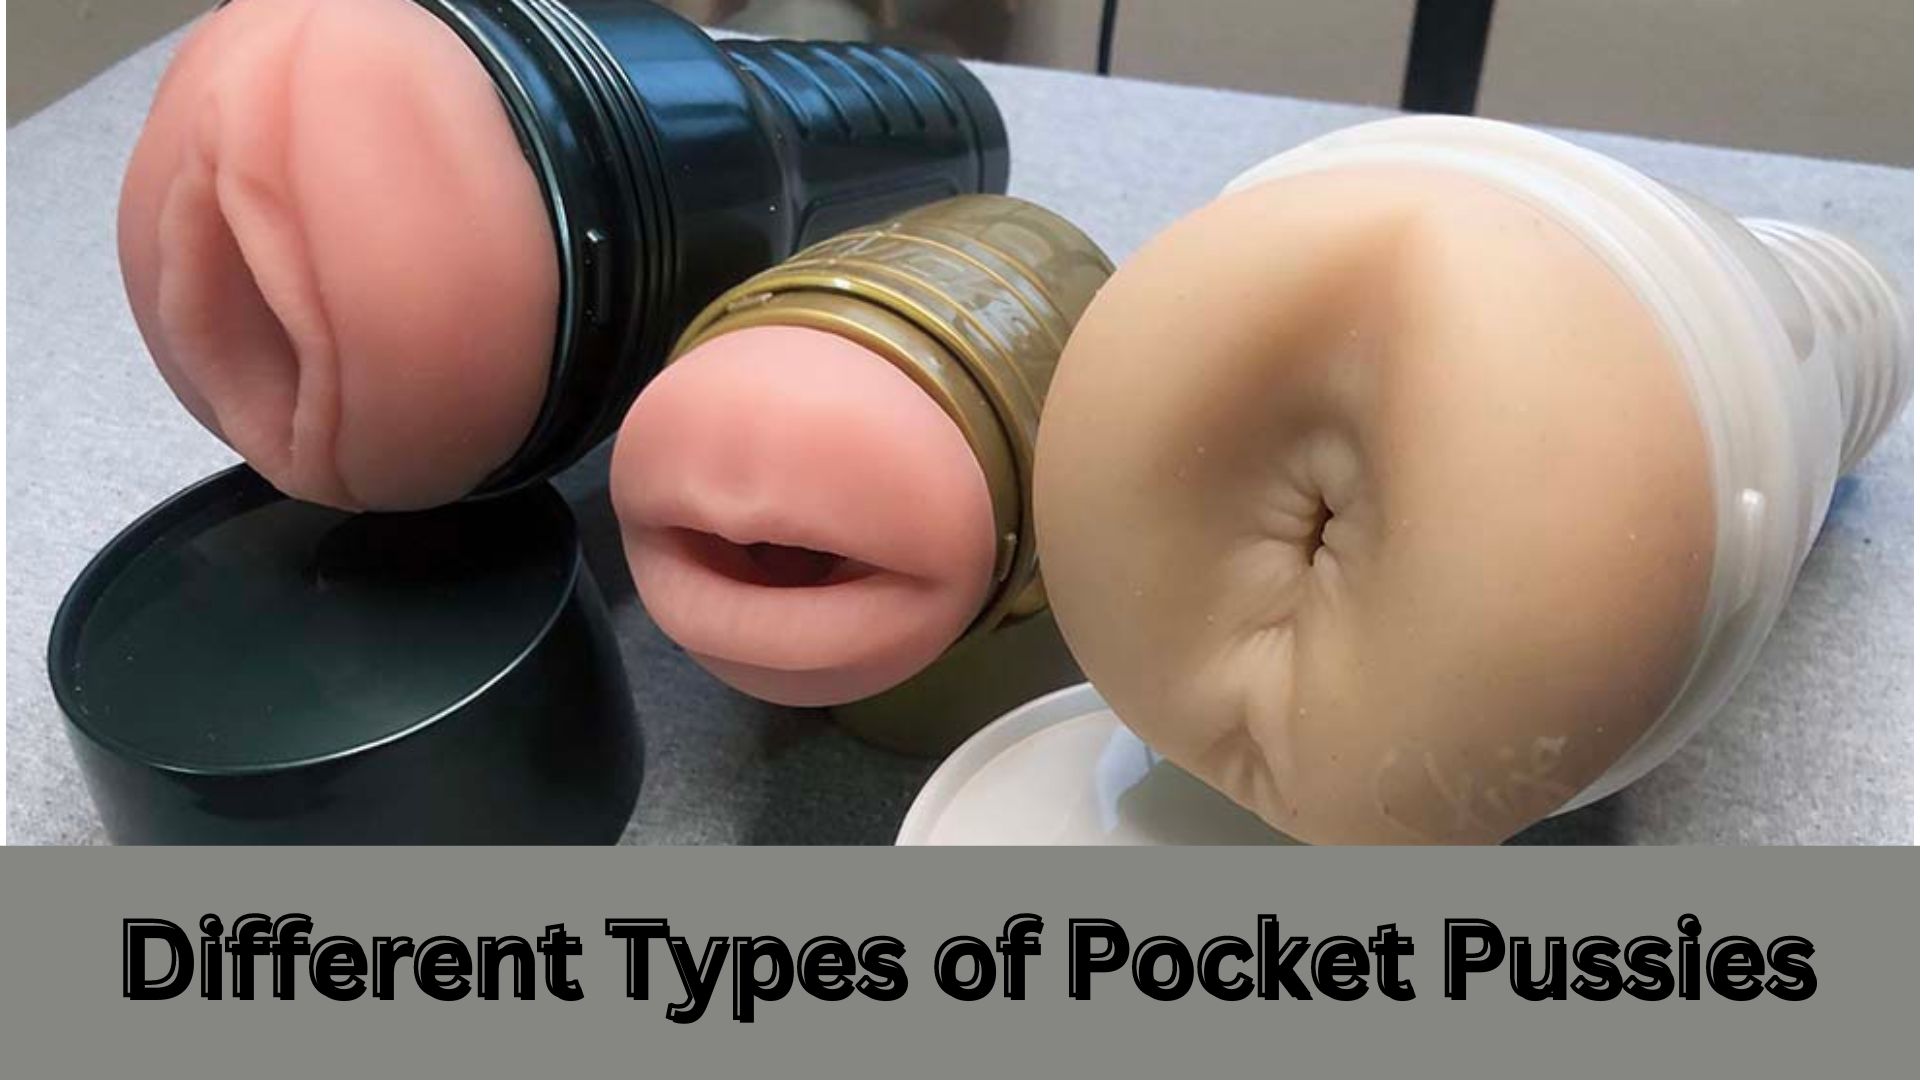 Different Types of Pocket Pussies